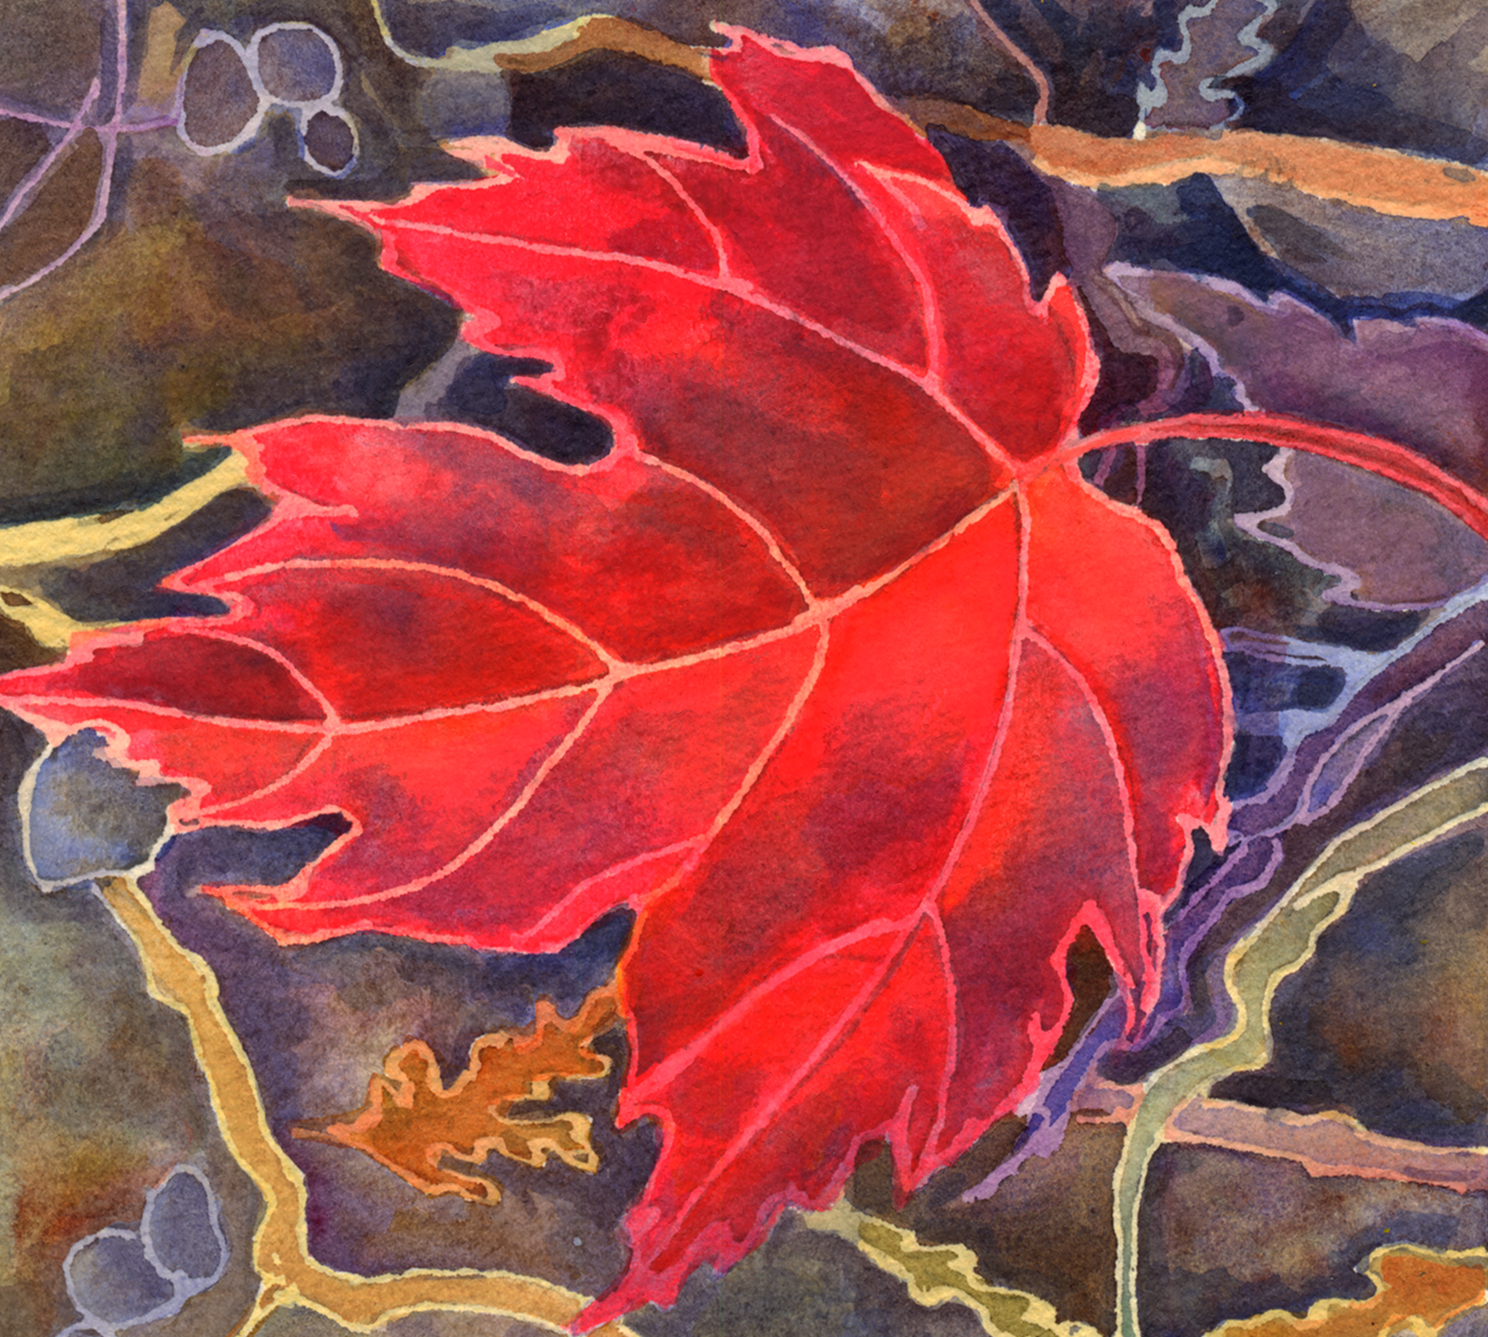 "Red Maple Leaf" no longer available